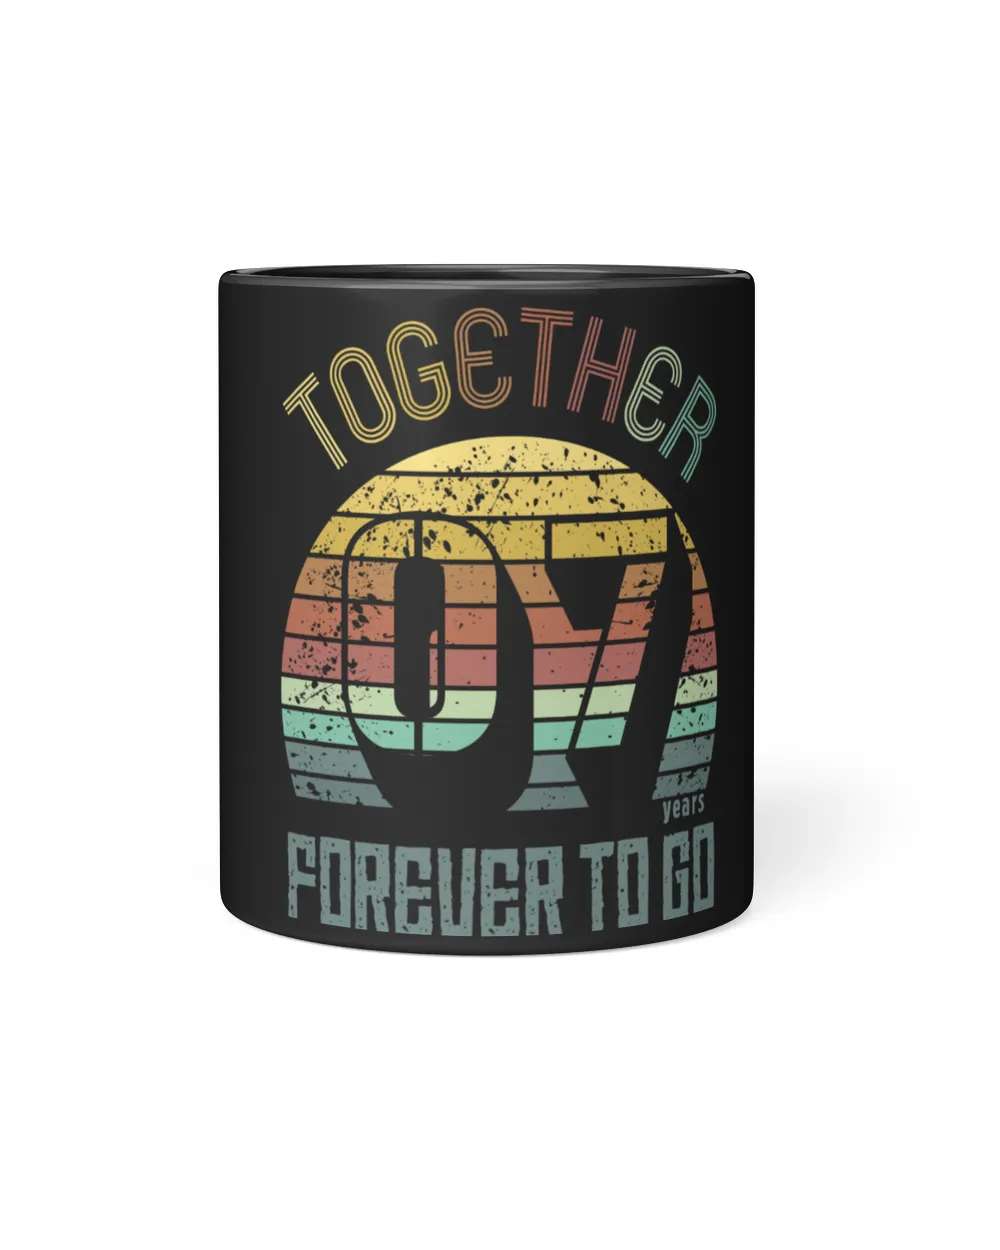 Forever Together - Personalized Anniversary Gifts for Couples